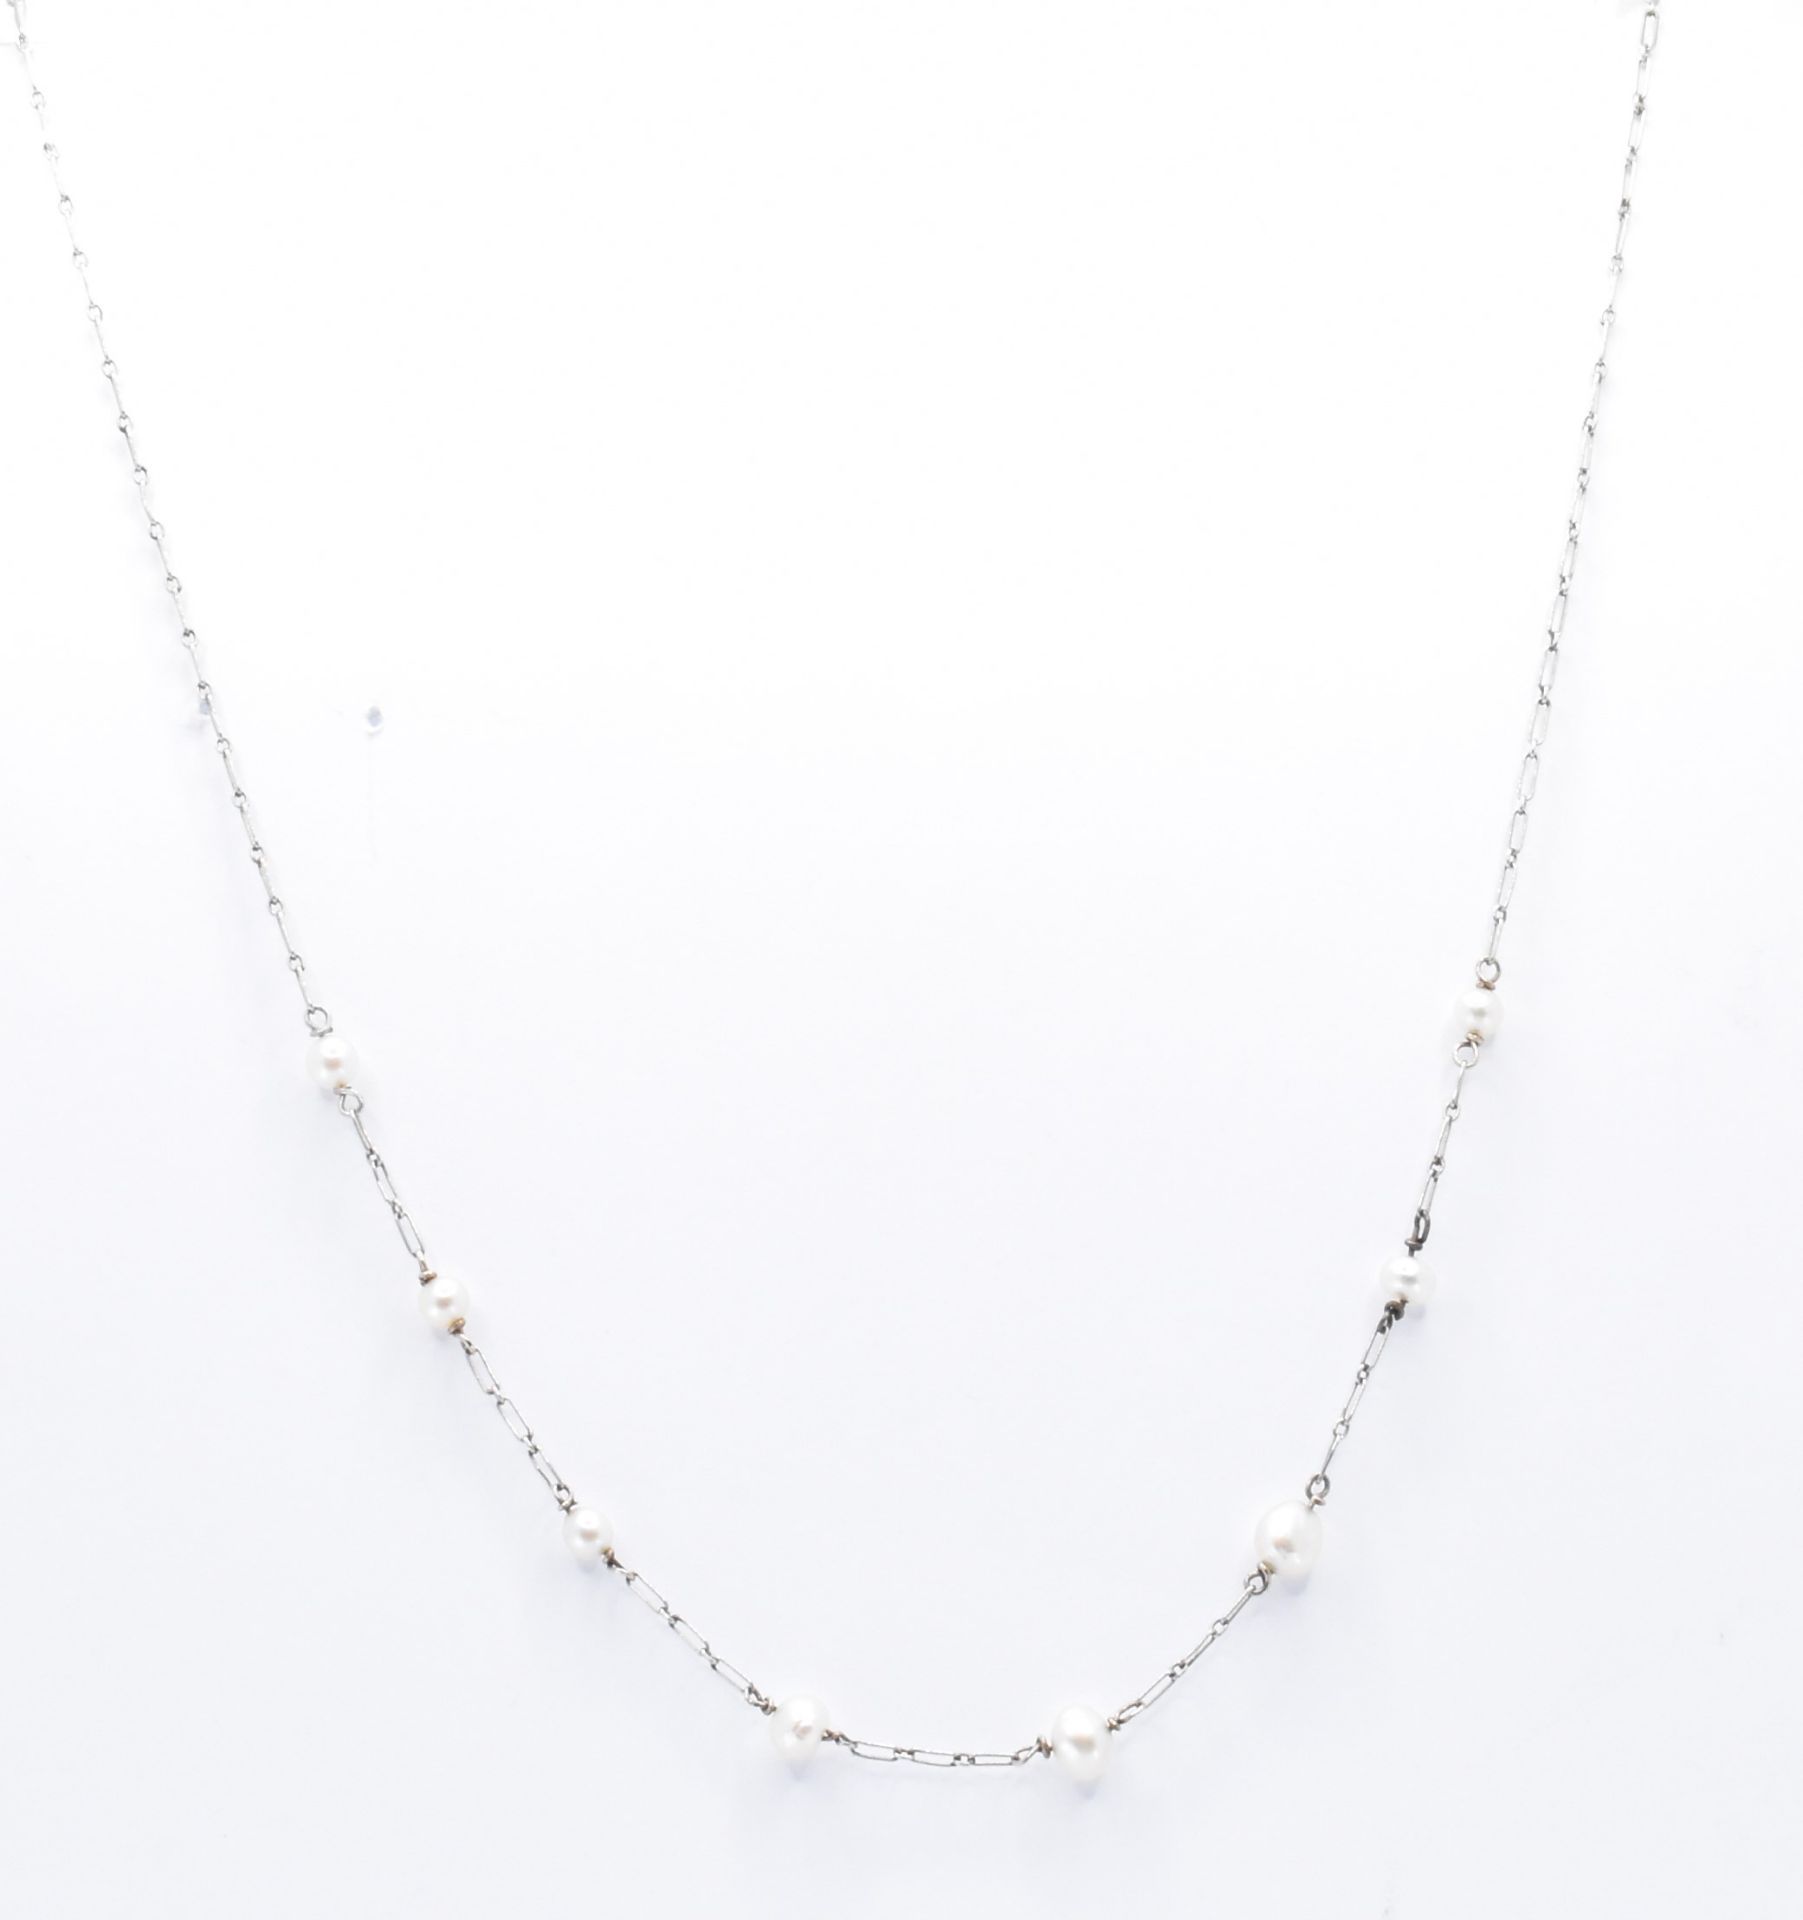 EDWARDIAN PLATINUM & PEARL NECKLACE CHAIN - Image 2 of 3